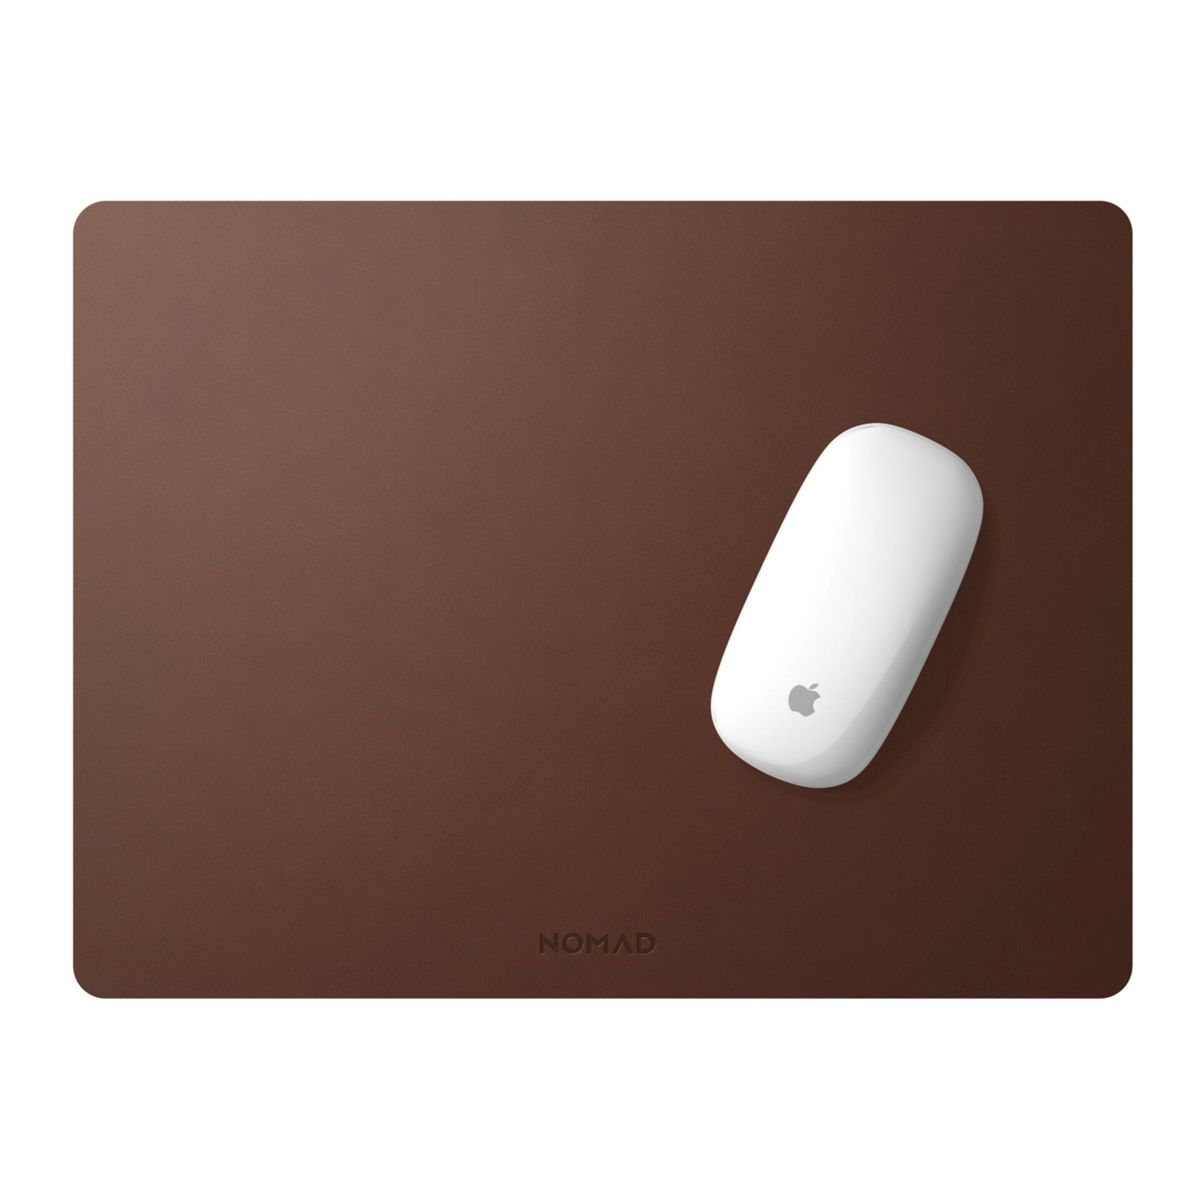 NOMAD Mousepad Rustic Brown Mauspad 16-Inch, Leather